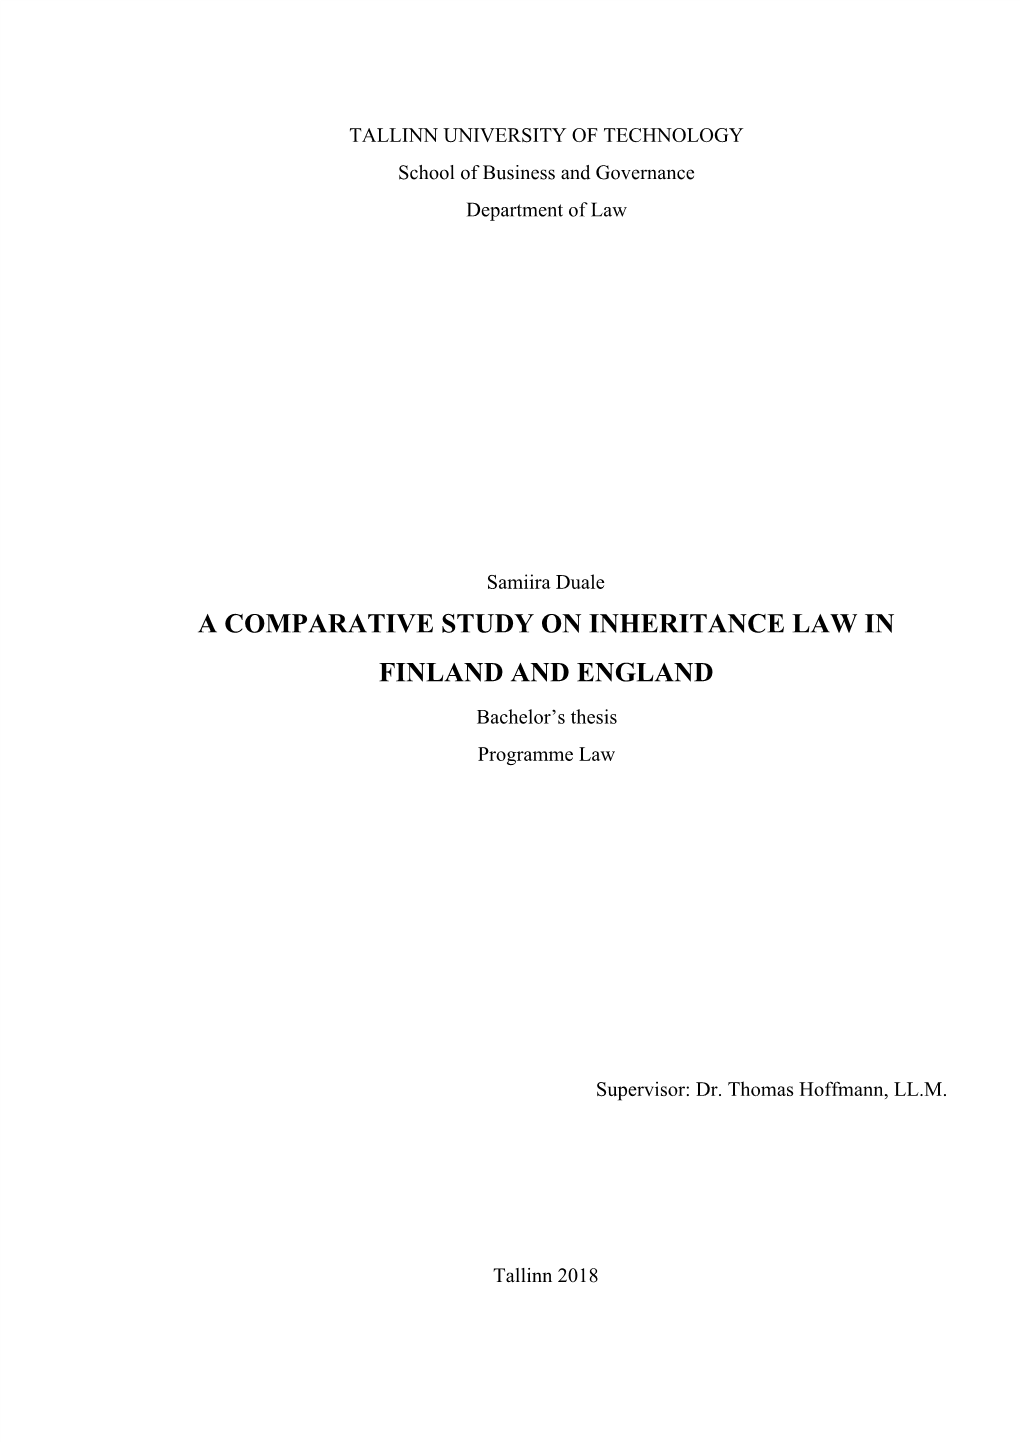 A Comparative Study on Inheritance Law in Finland and England